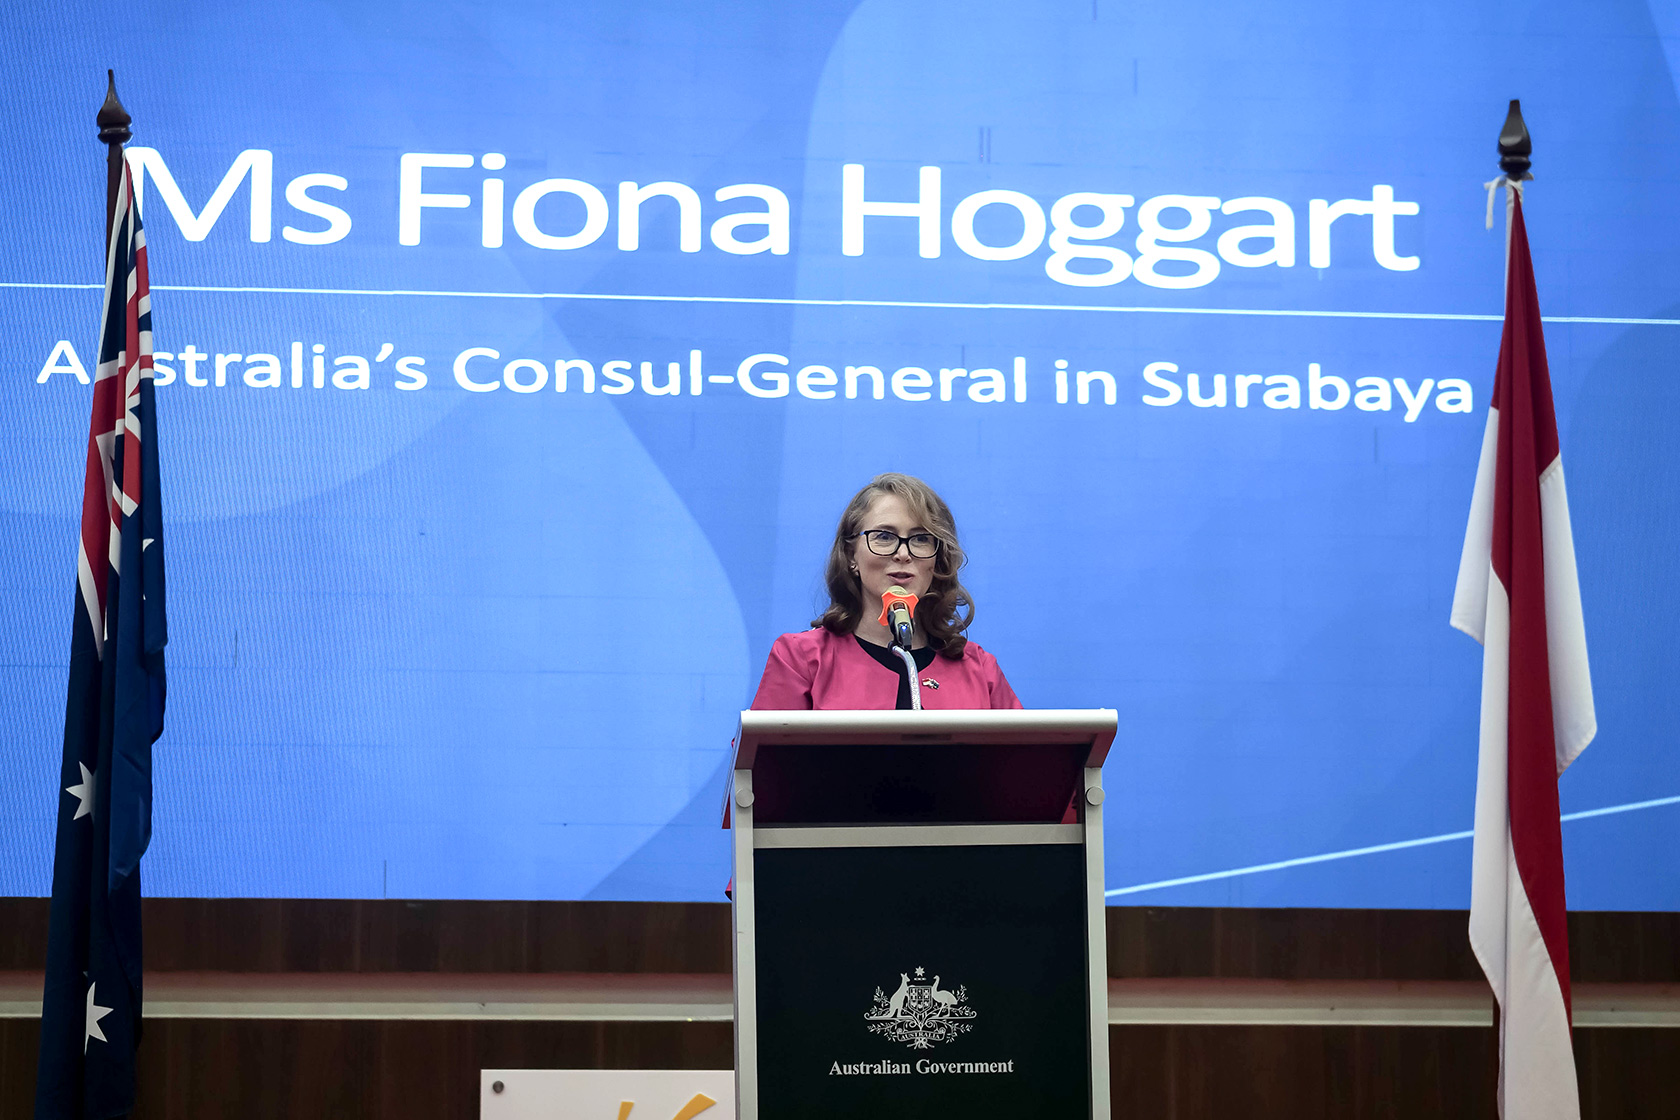 Ms Fiona Hoggart, Australia's Consul-General in Surabaya, sets a welcoming tone for the evening with her opening remarks.